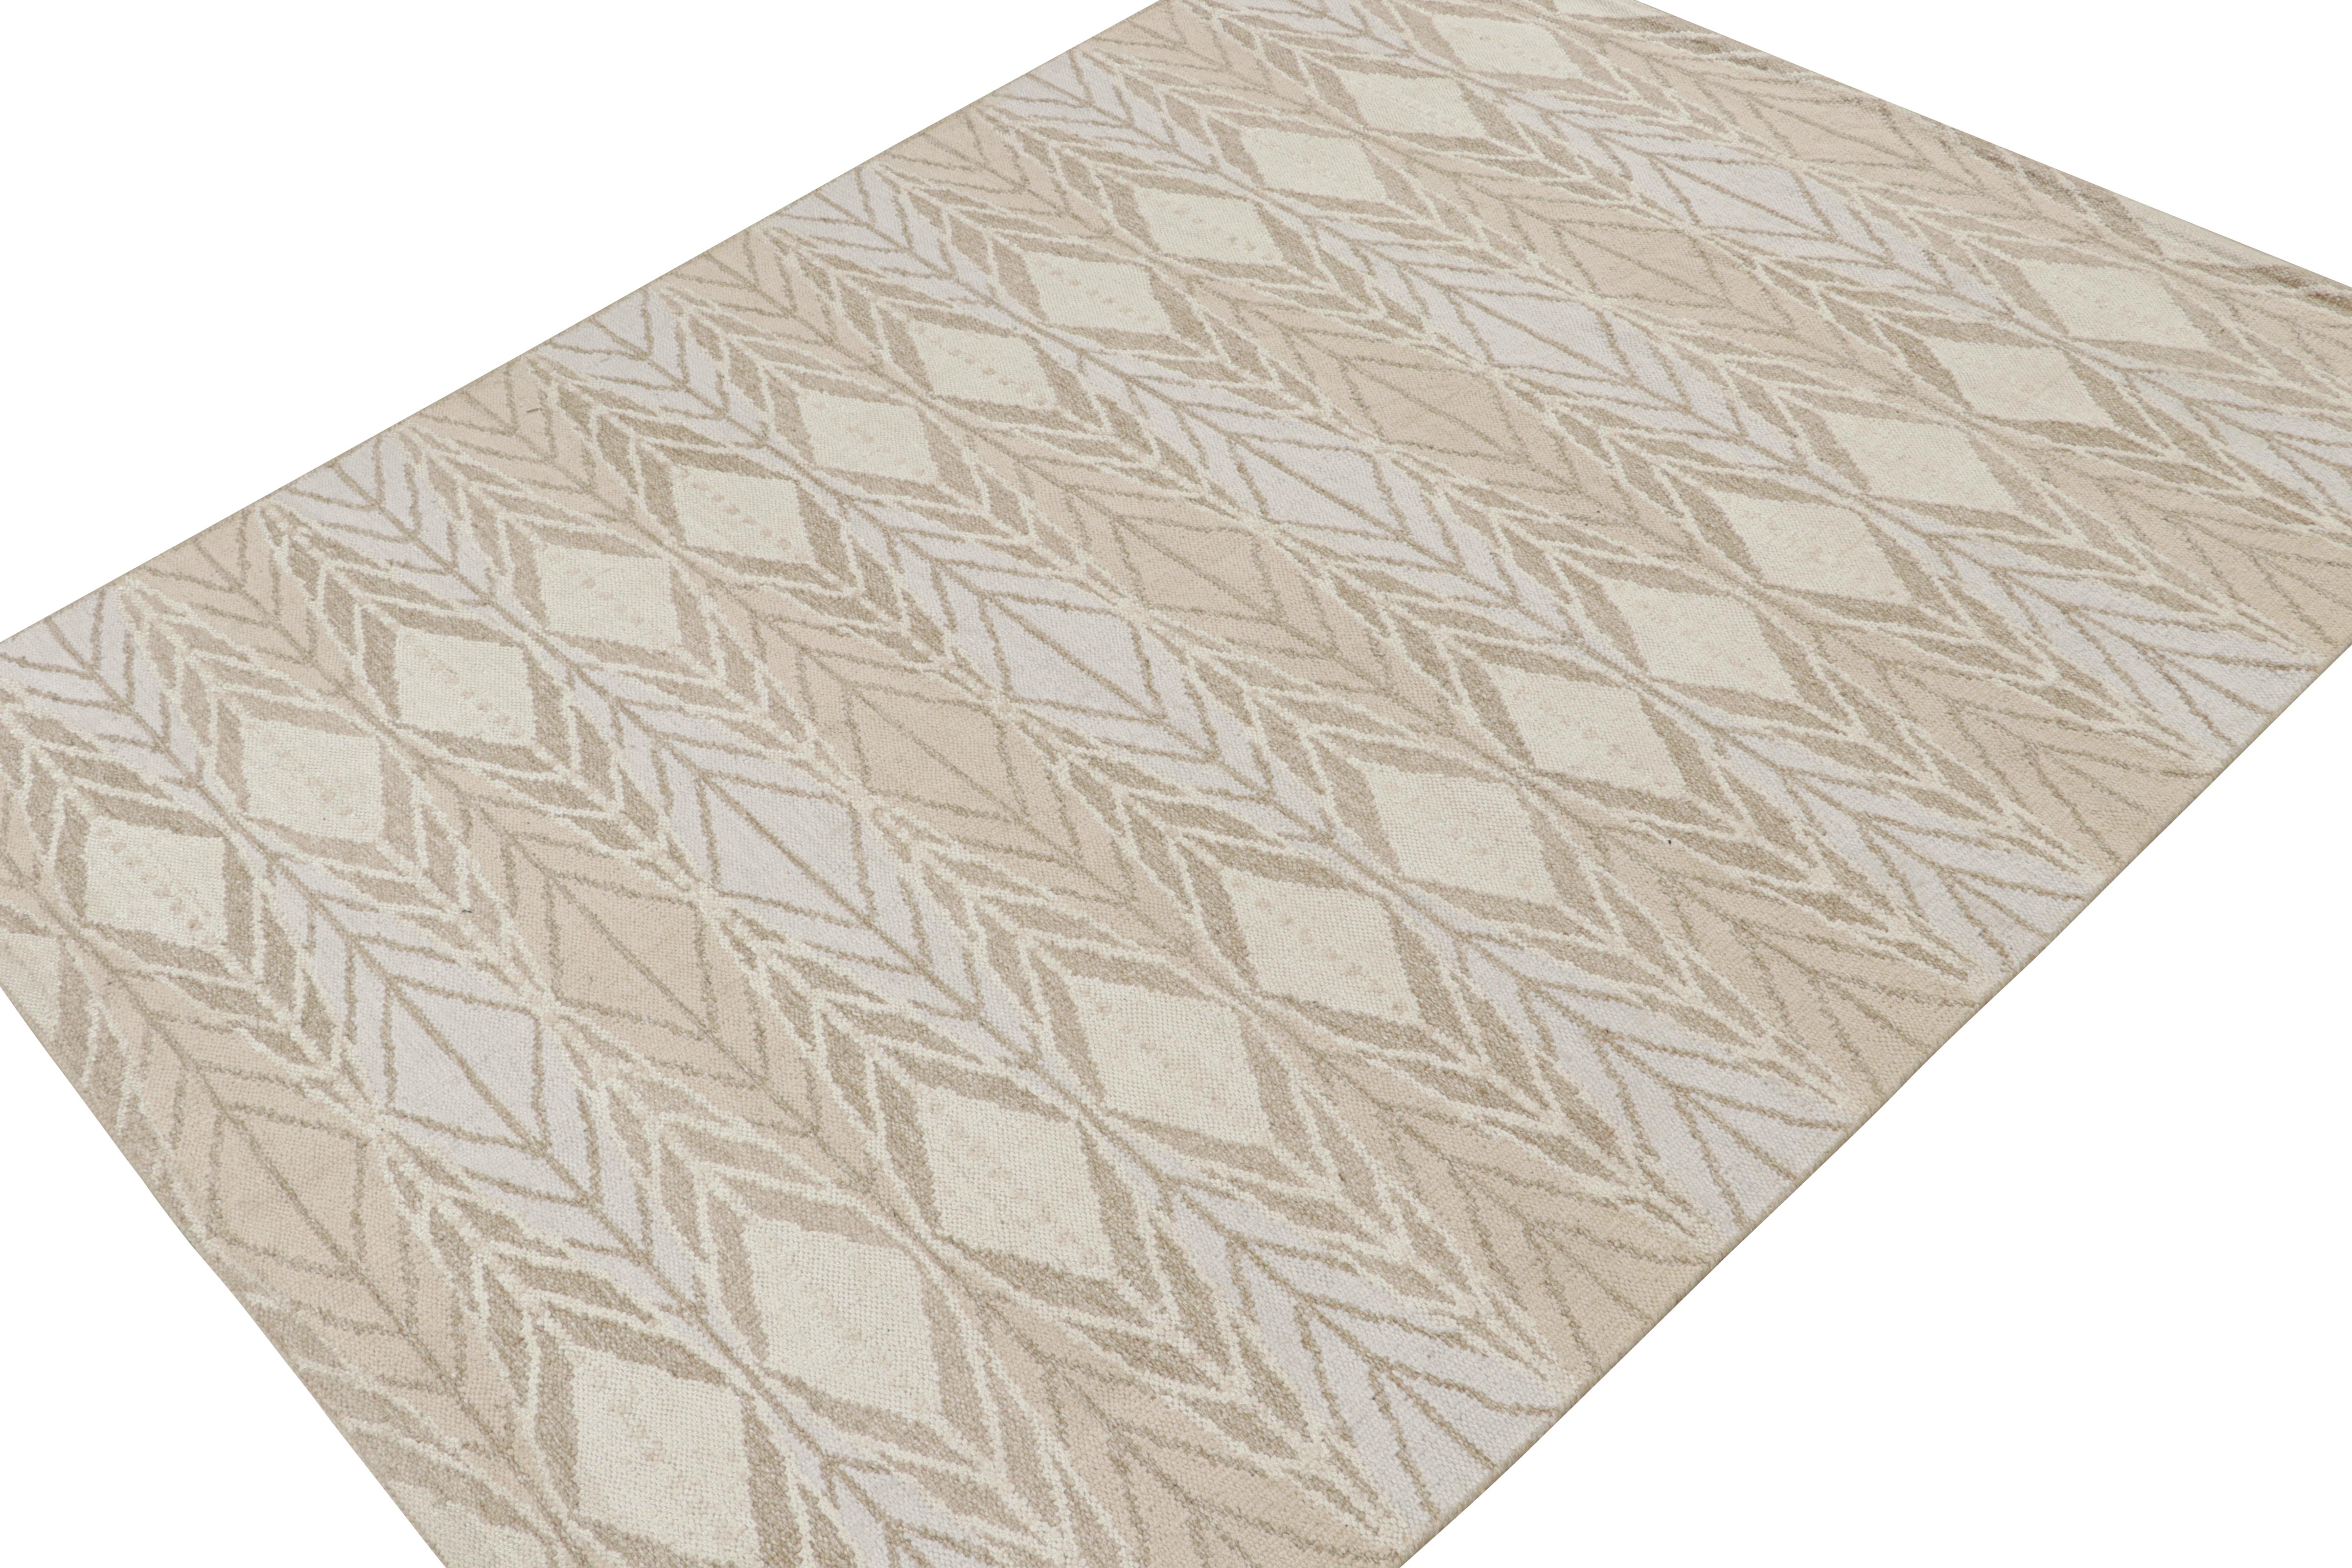 Indian Rug & Kilim’s Scandinavian Style Kilim in Taupe and White Geometric Pattern For Sale